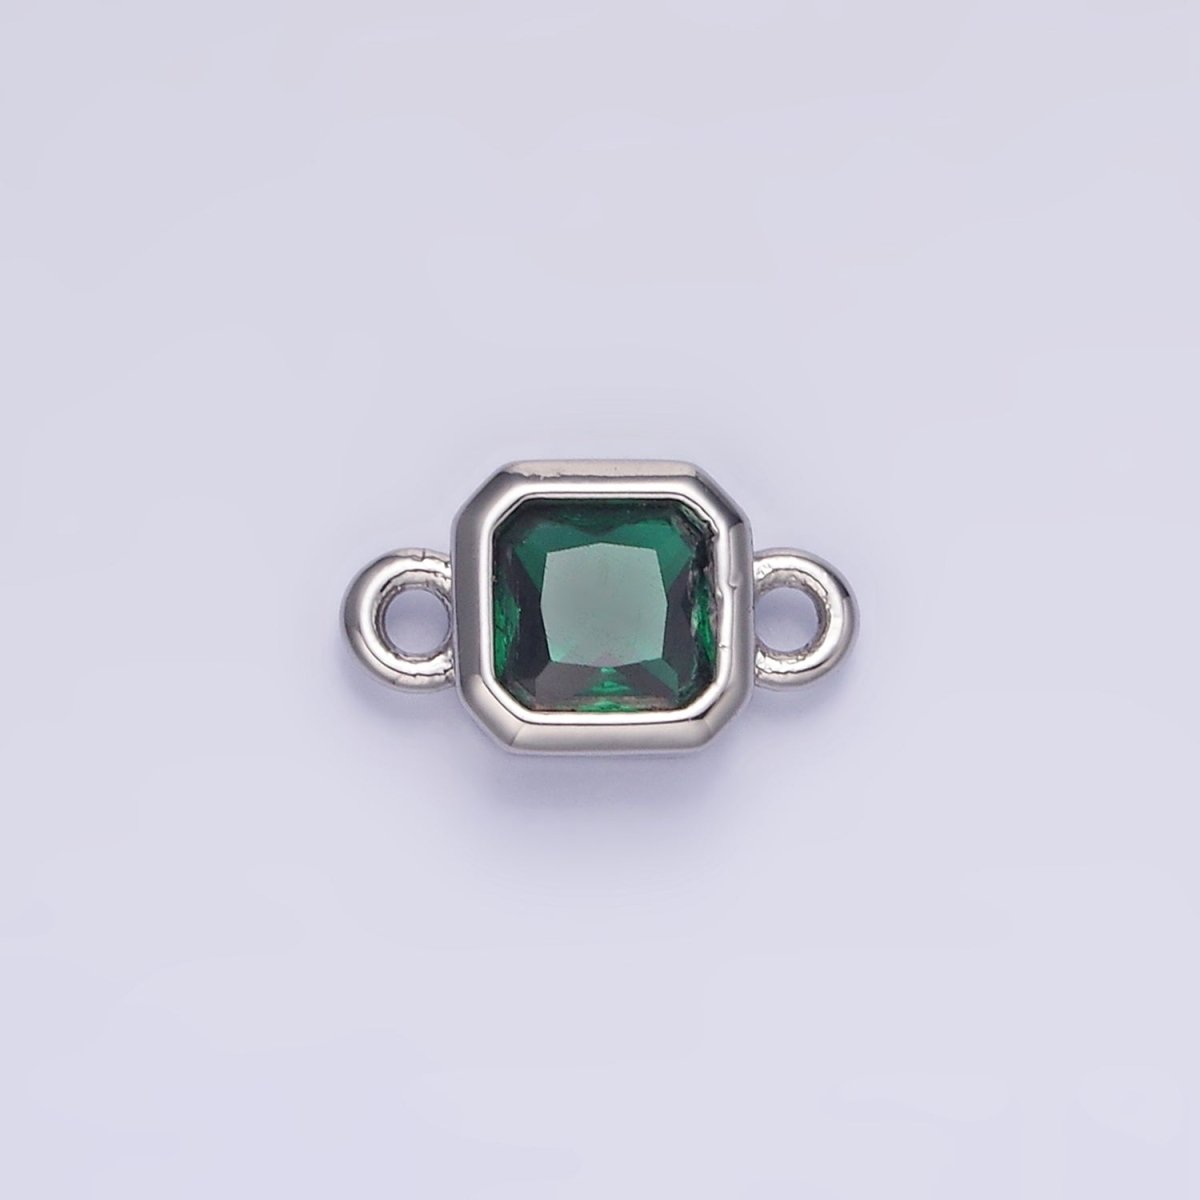 24K Gold Filled Square CZ Edged Bezel Connector in Gold & Silver | G472 - G483 - DLUXCA